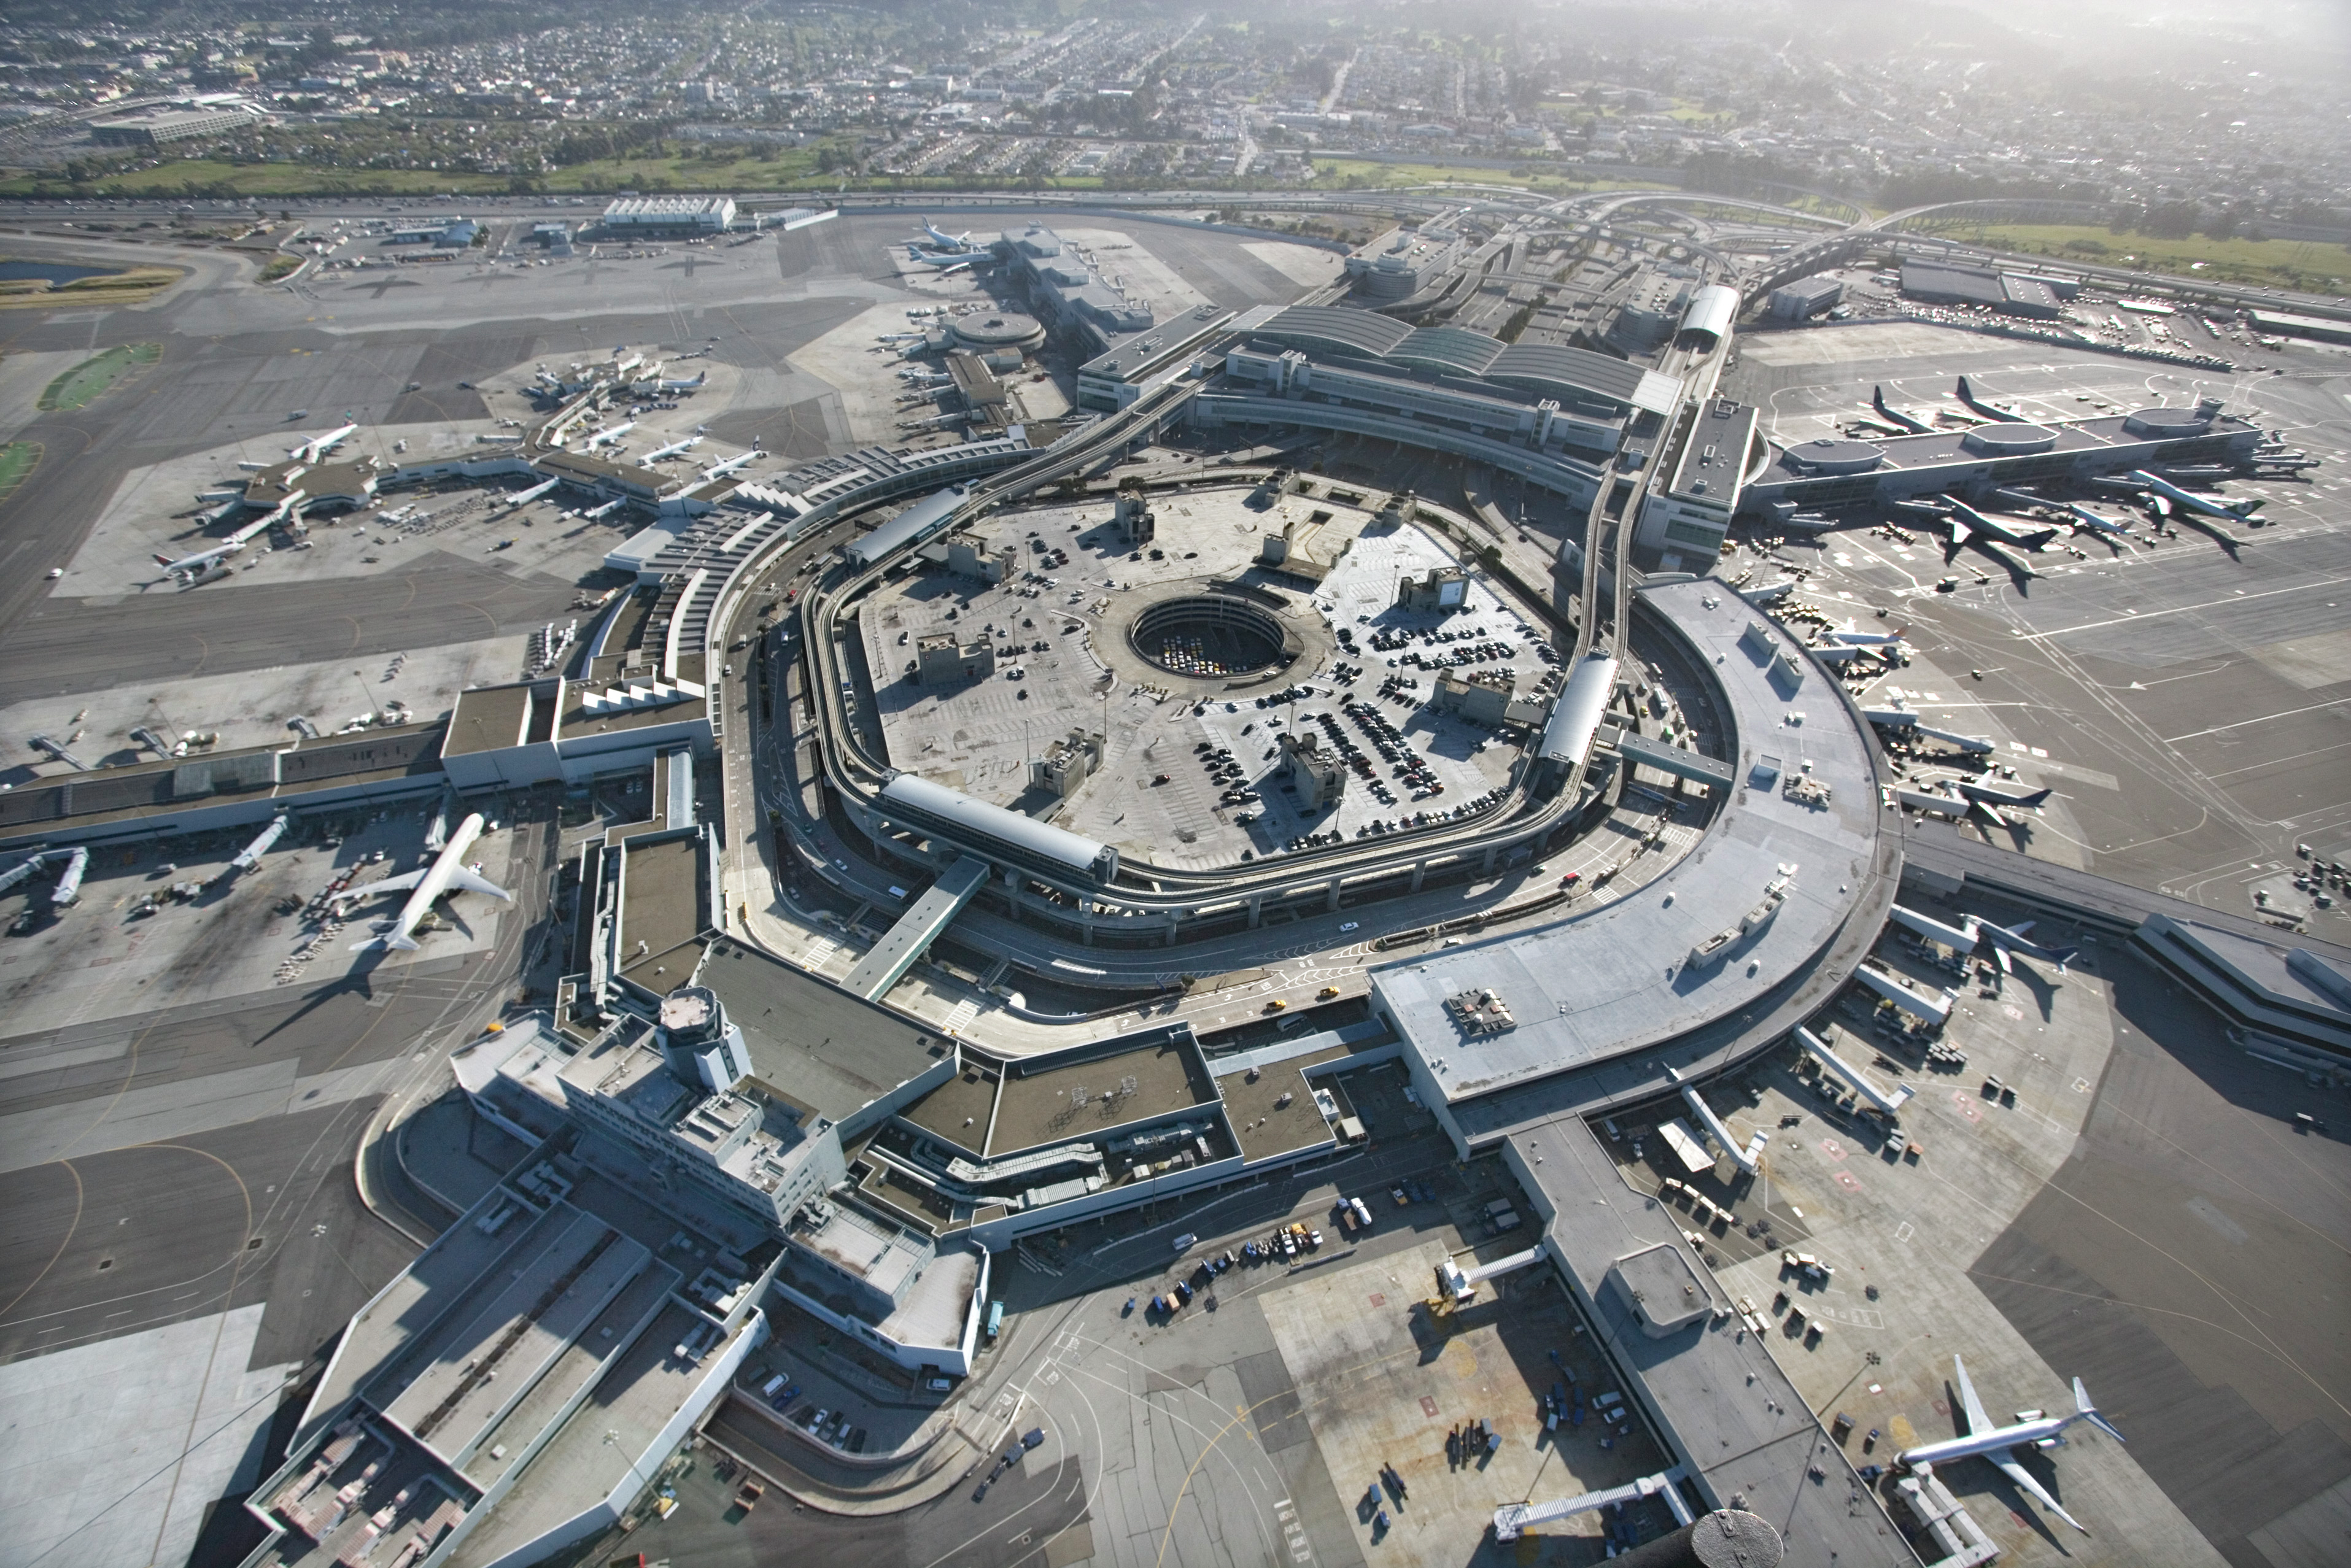 Two years after receiving top marks, SFO plummets in the rankings